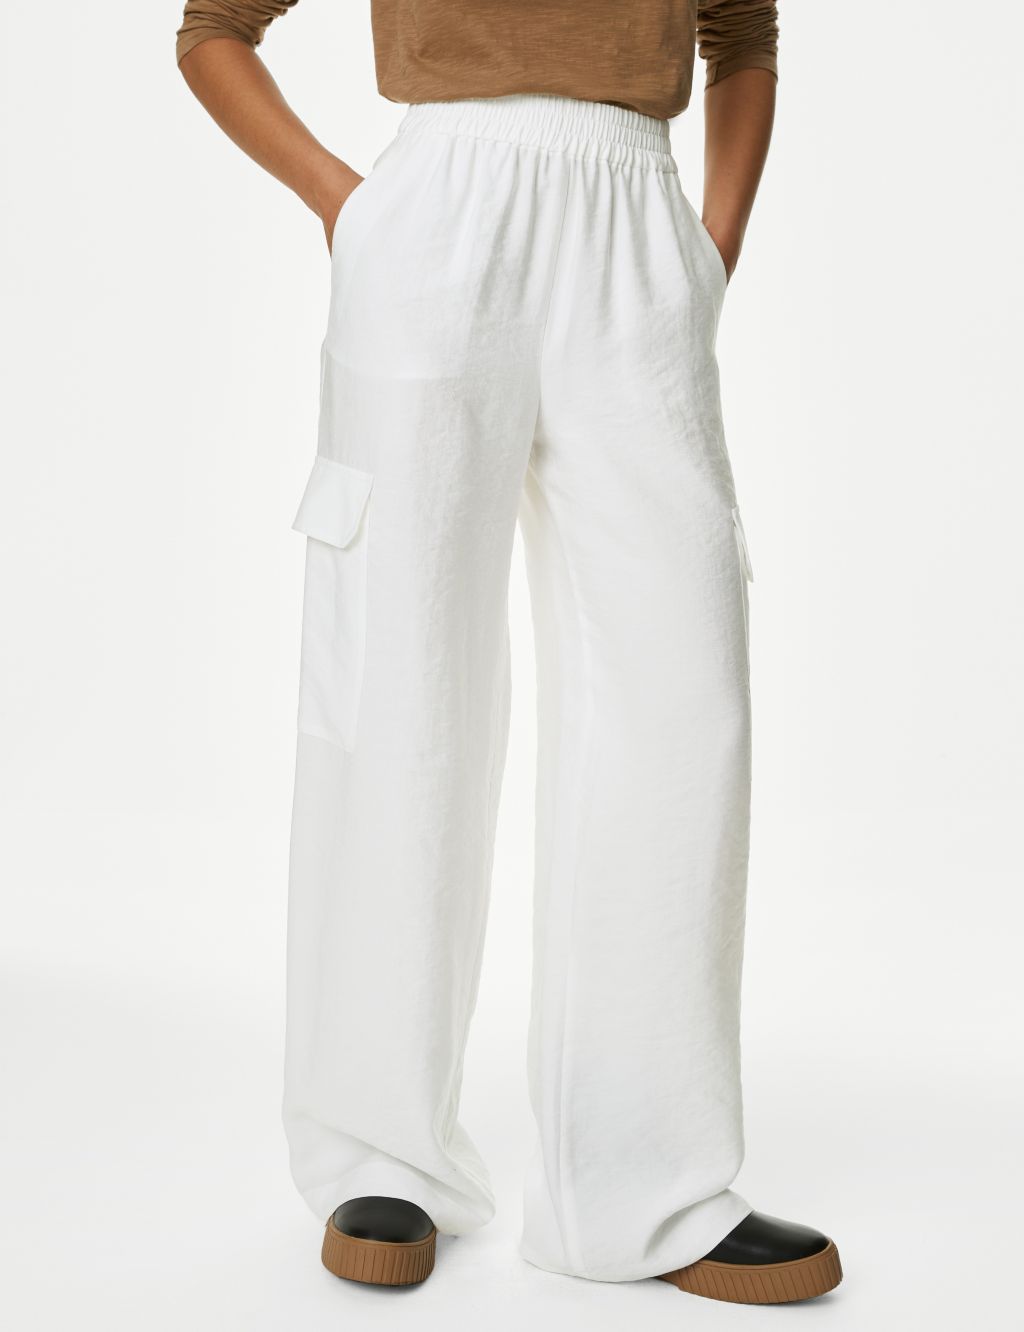 Utility Wide Leg Trousers image 3